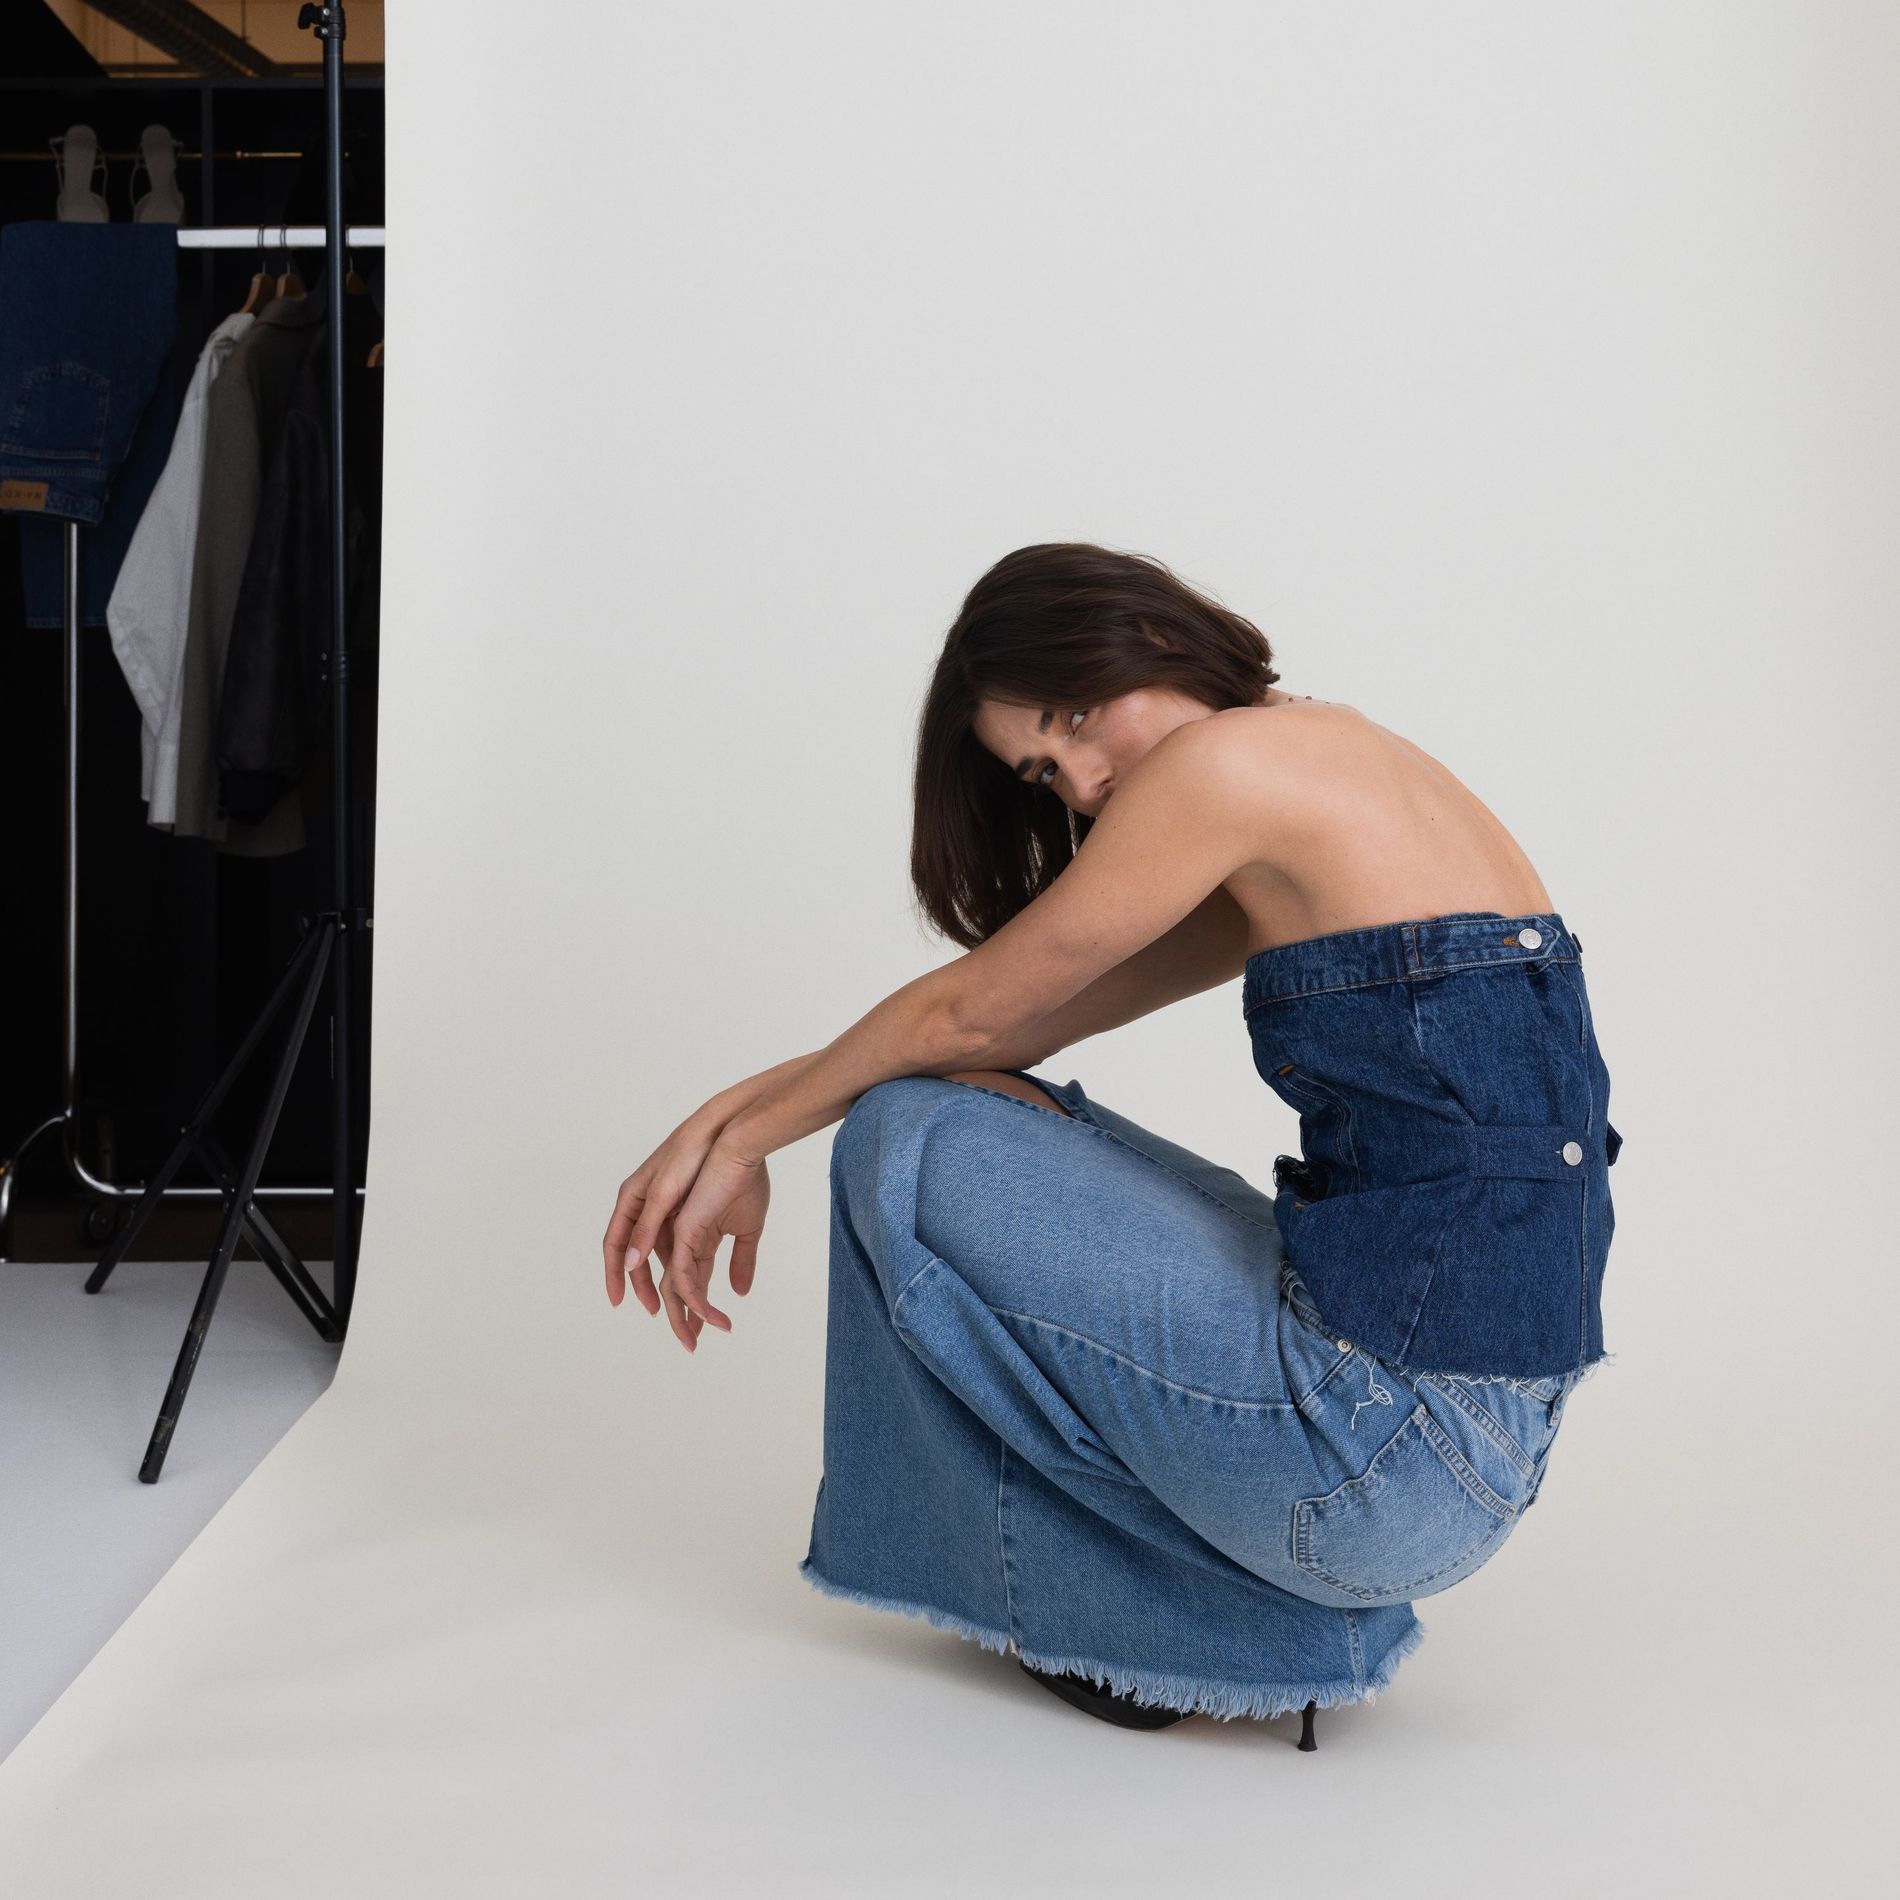 Model poses with remade denim pieces